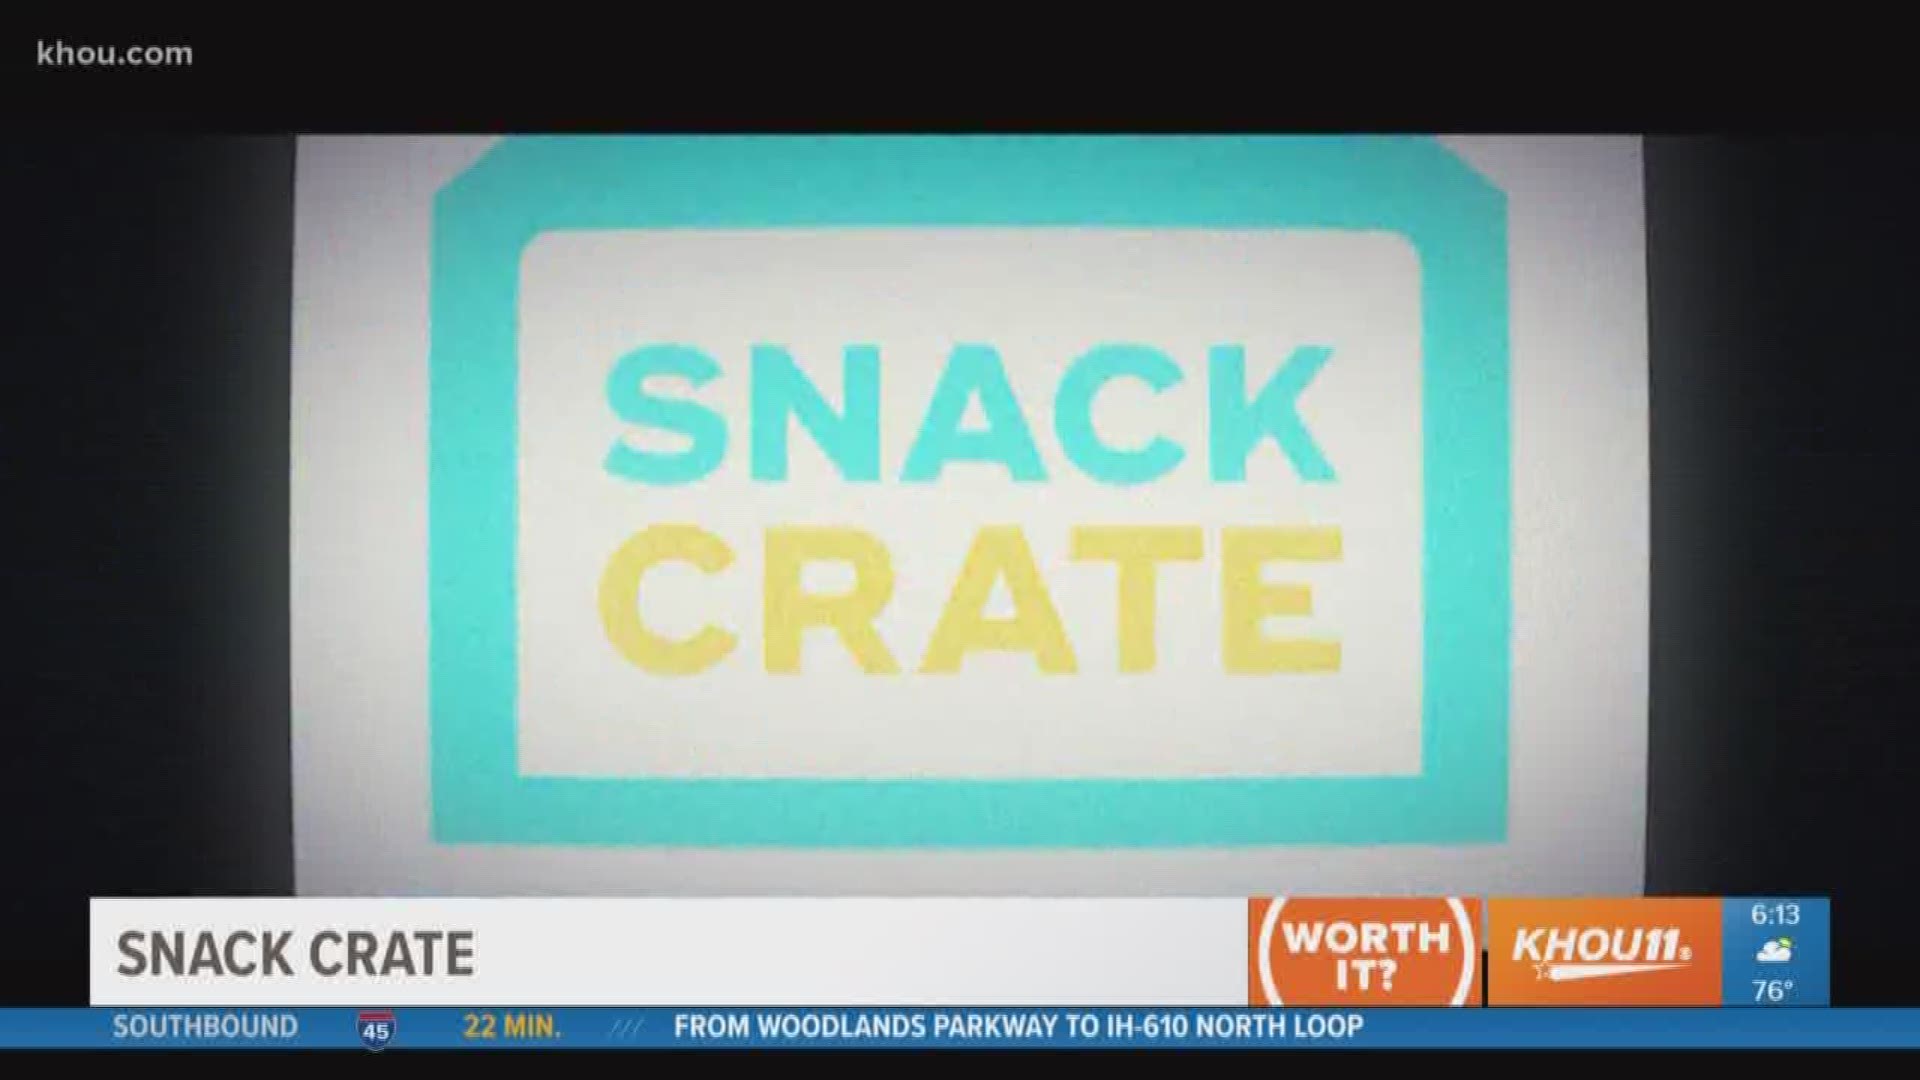 Everybody loves snacks! So when a viewer asked Tiffany Craig to try something called Snack Crate, she was all in!